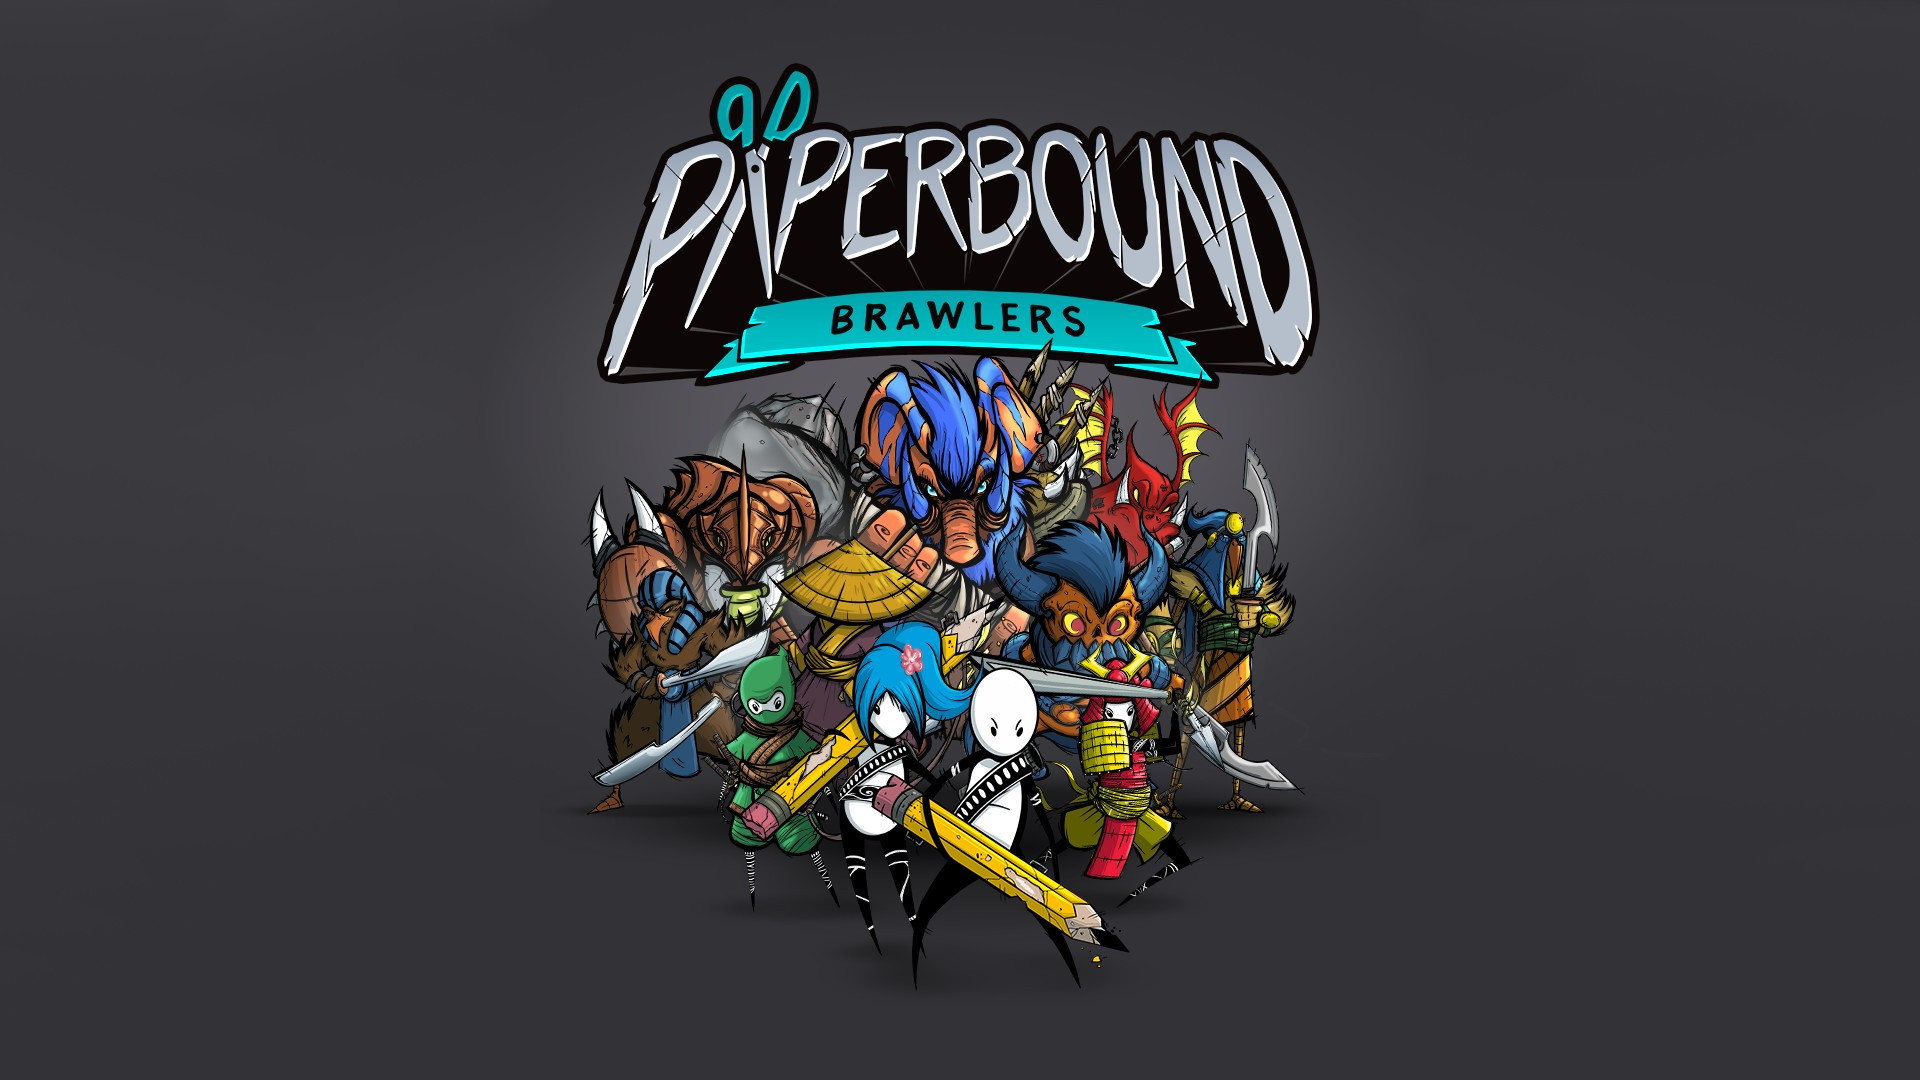 Paperbound Brawlers: A Seven-Year Story in Seven Paragraphs